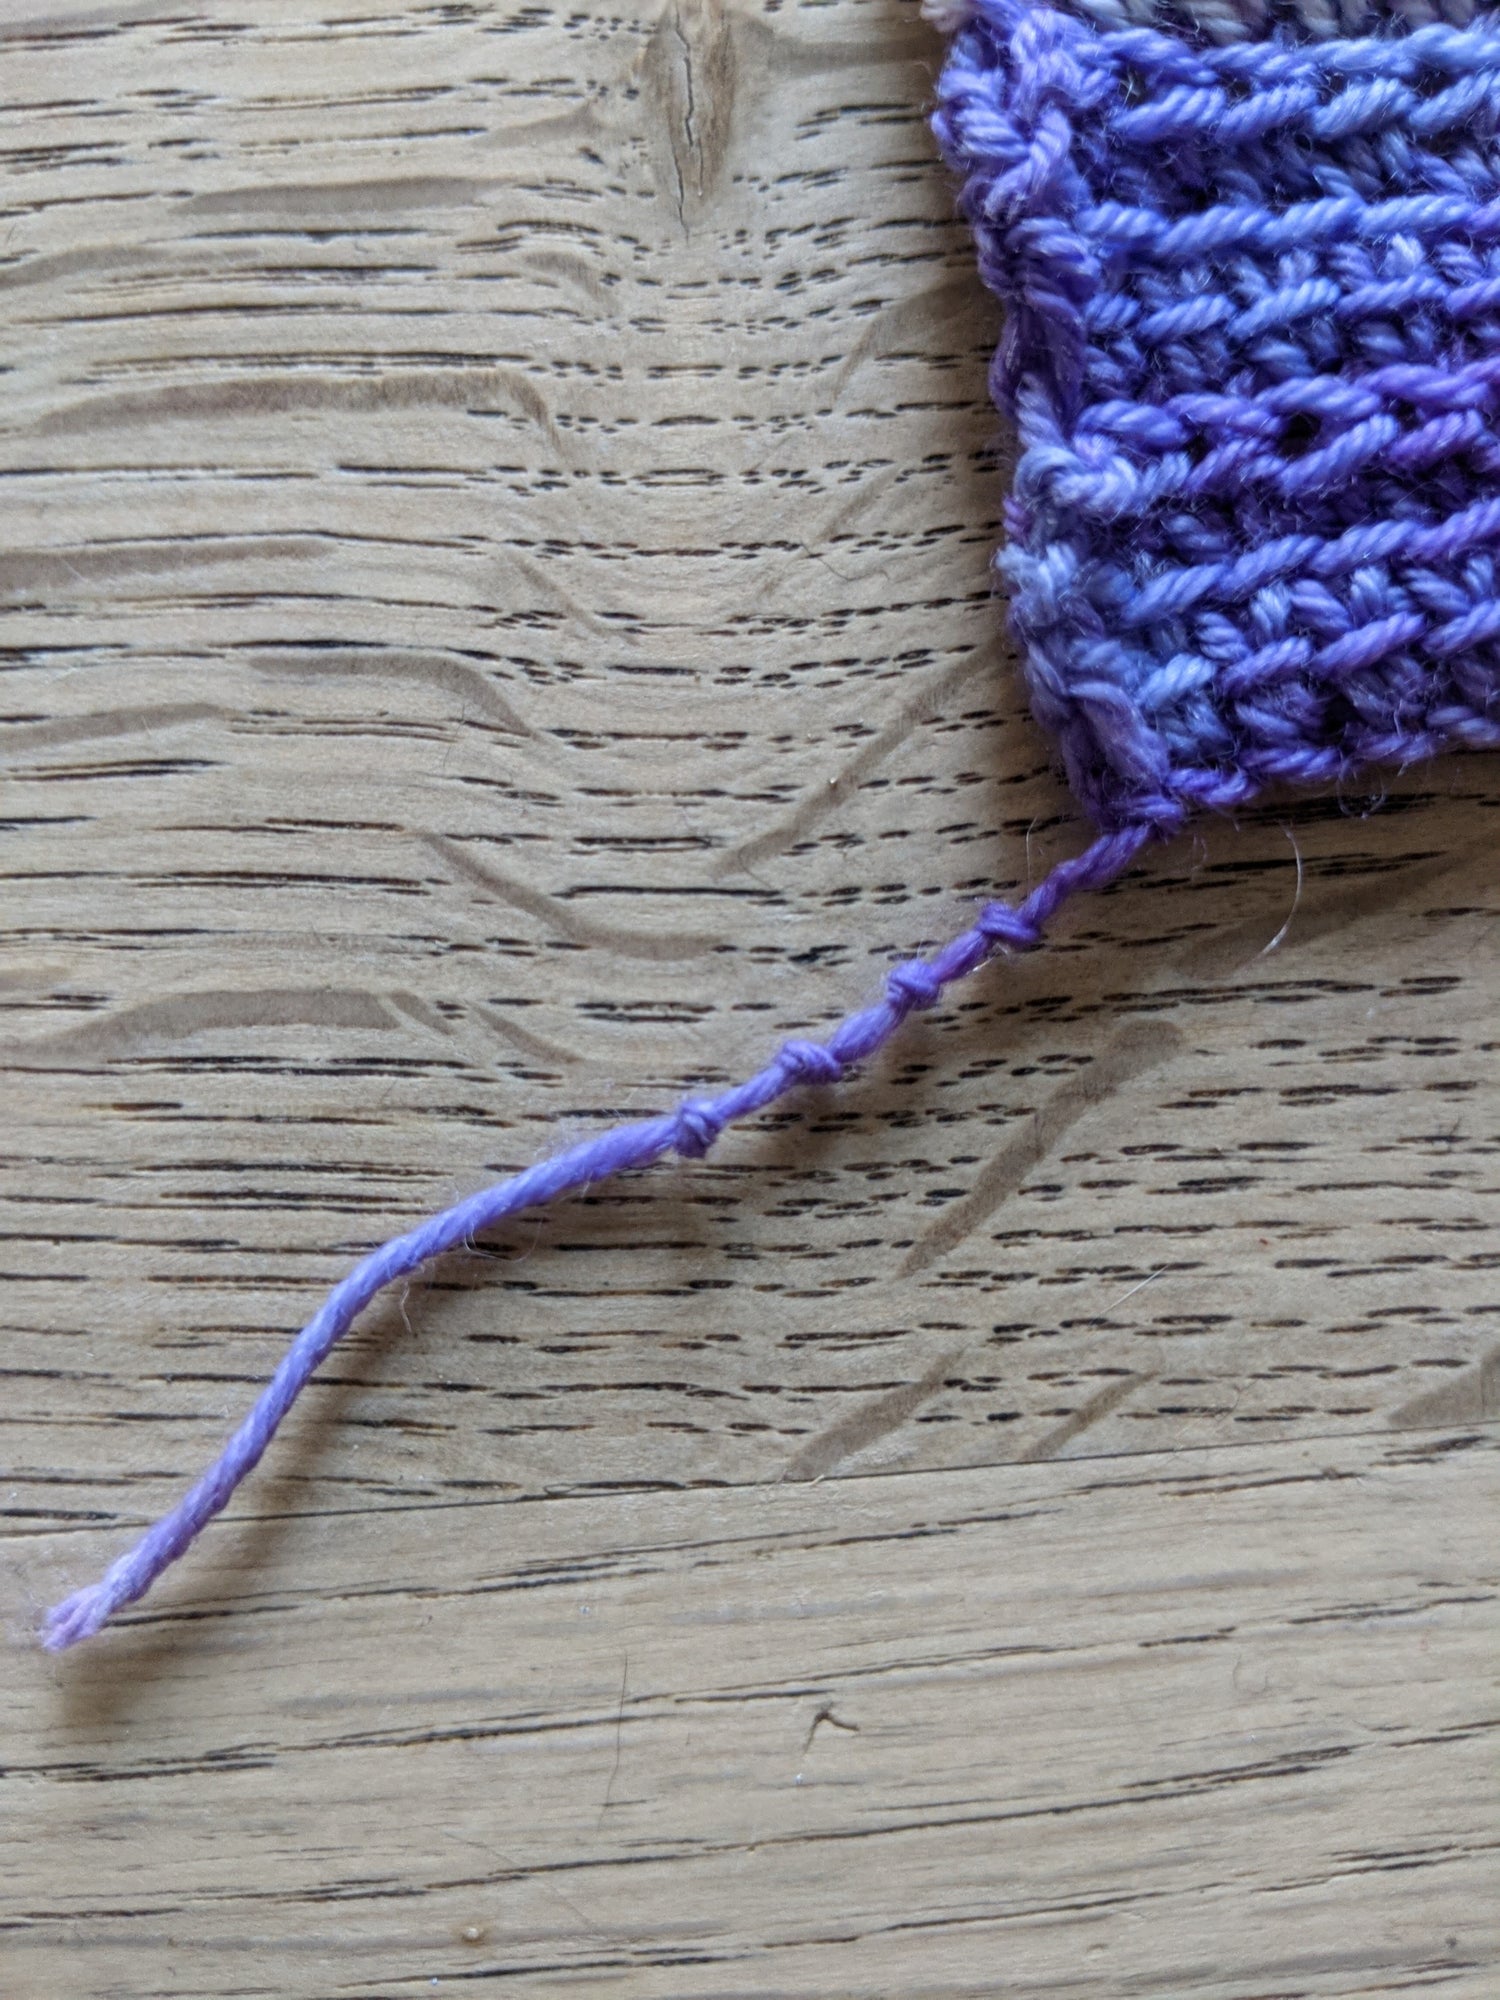 knotted yarn tail to record hook sized used